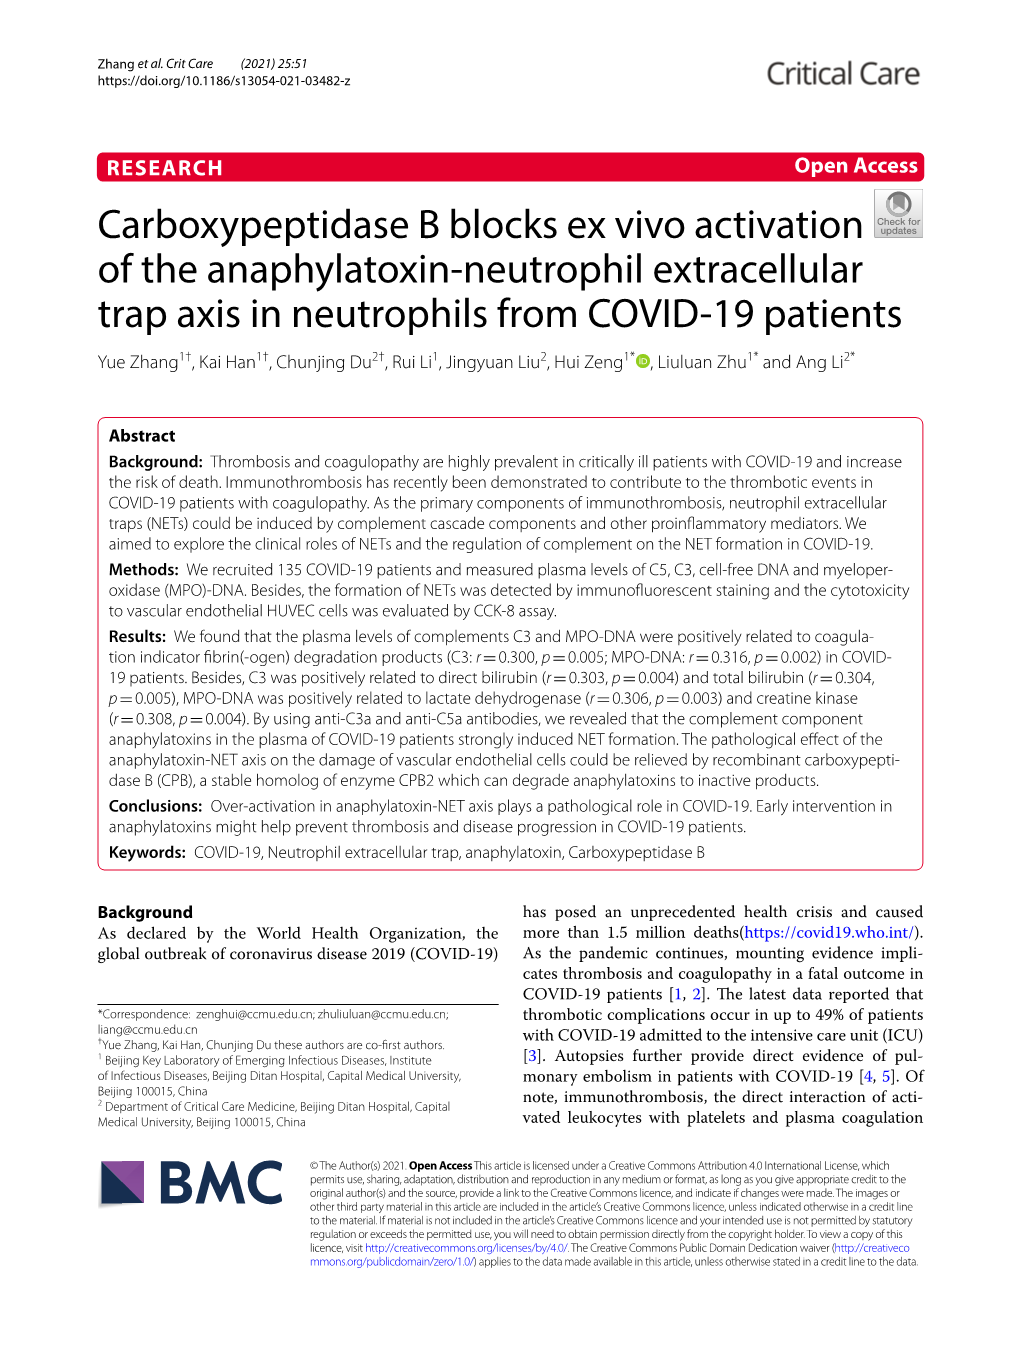 Over-Activation of Anaphylatoxin–Neutrophil Extracellular Trap Axis in COVID-19 Patients